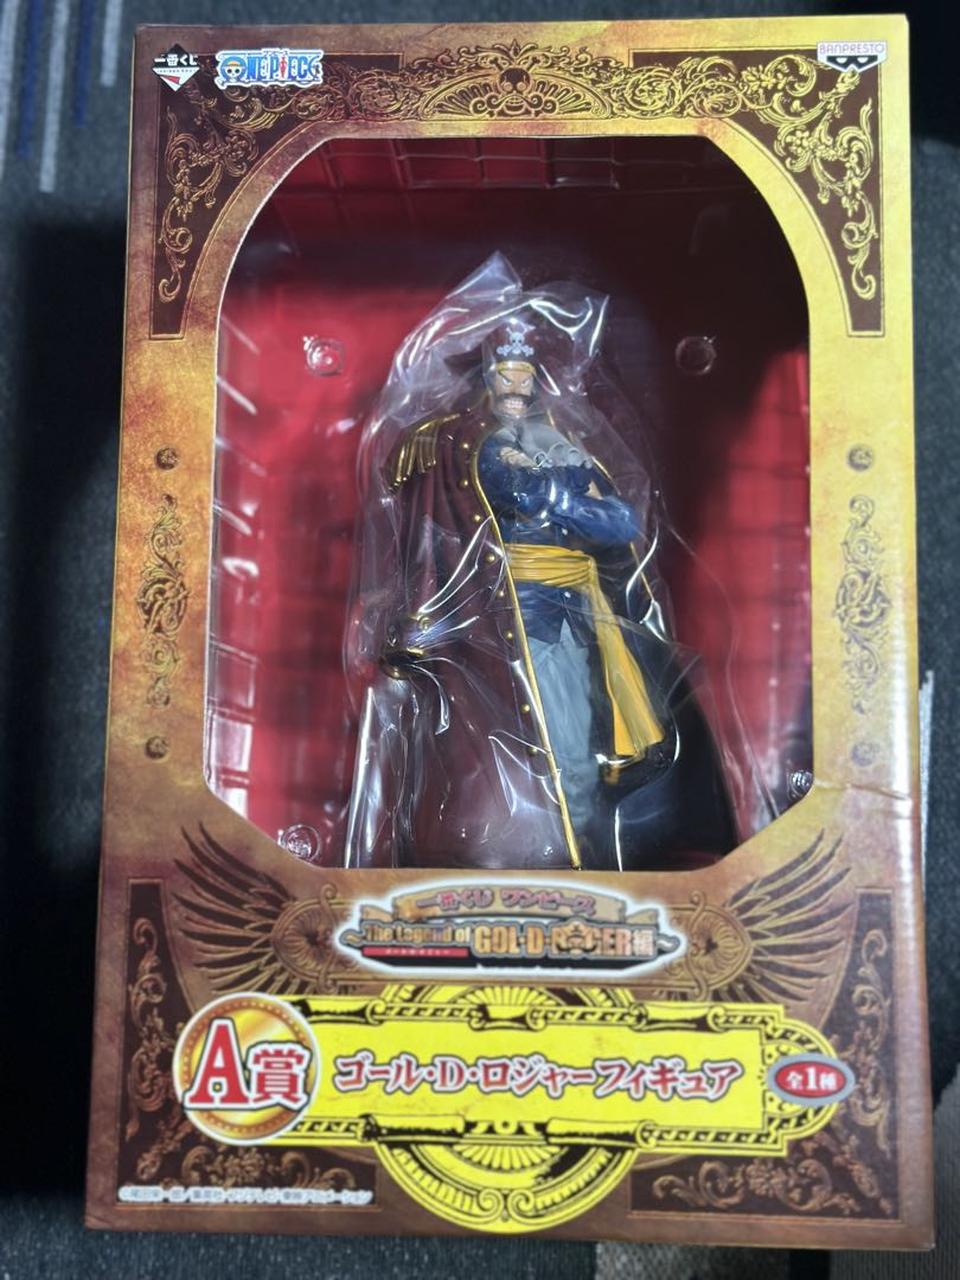 Roger One Piece Action Figure, One Piece Action Gold Roger